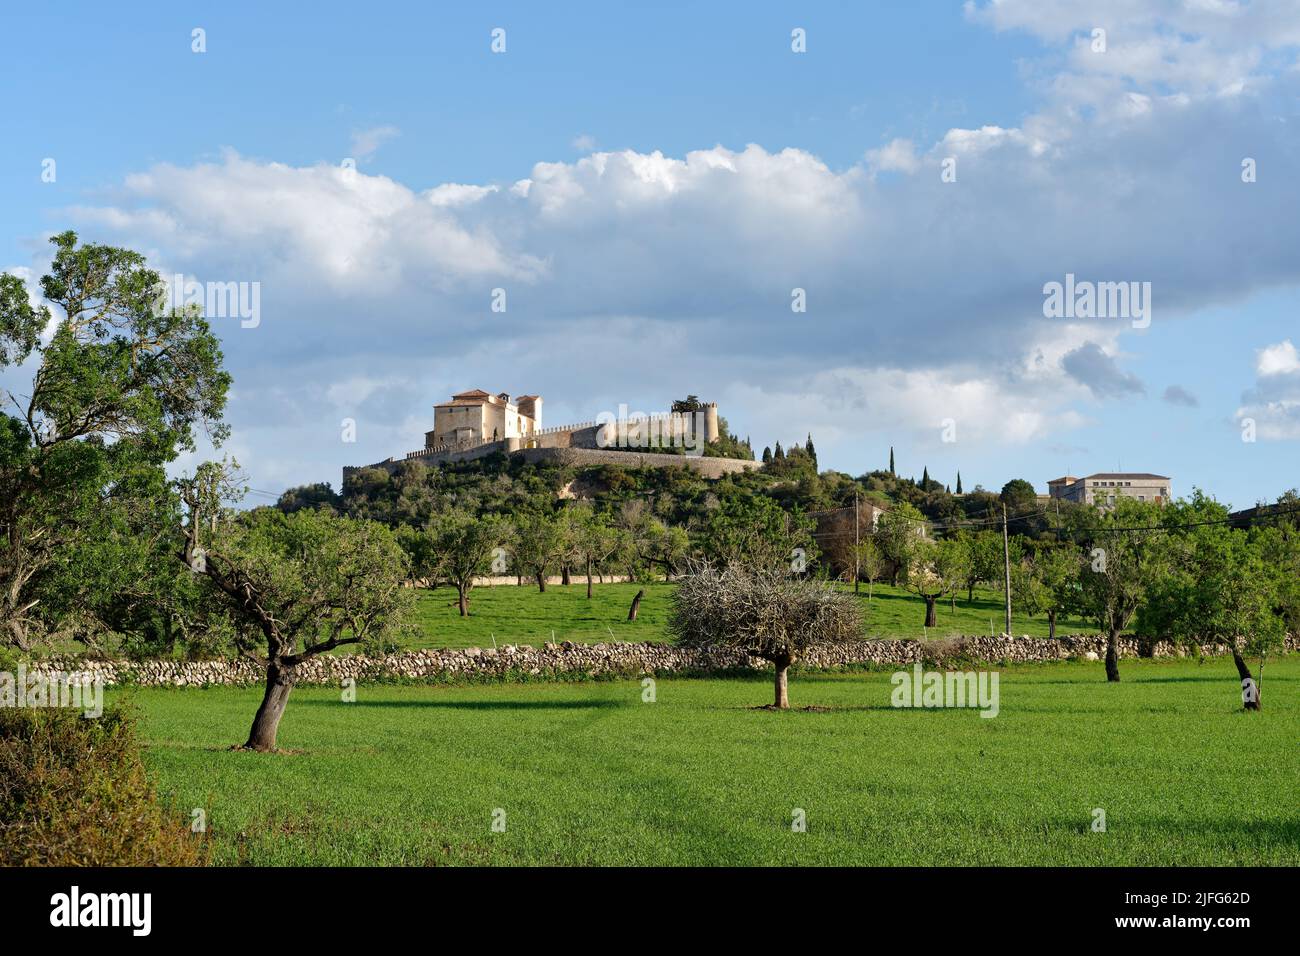 Mallorca - View of the Santuari de Sant Salvador pilgrimage church in Artà, meadows and trees in the foreground, sunny weather with slight cloud cover Stock Photo